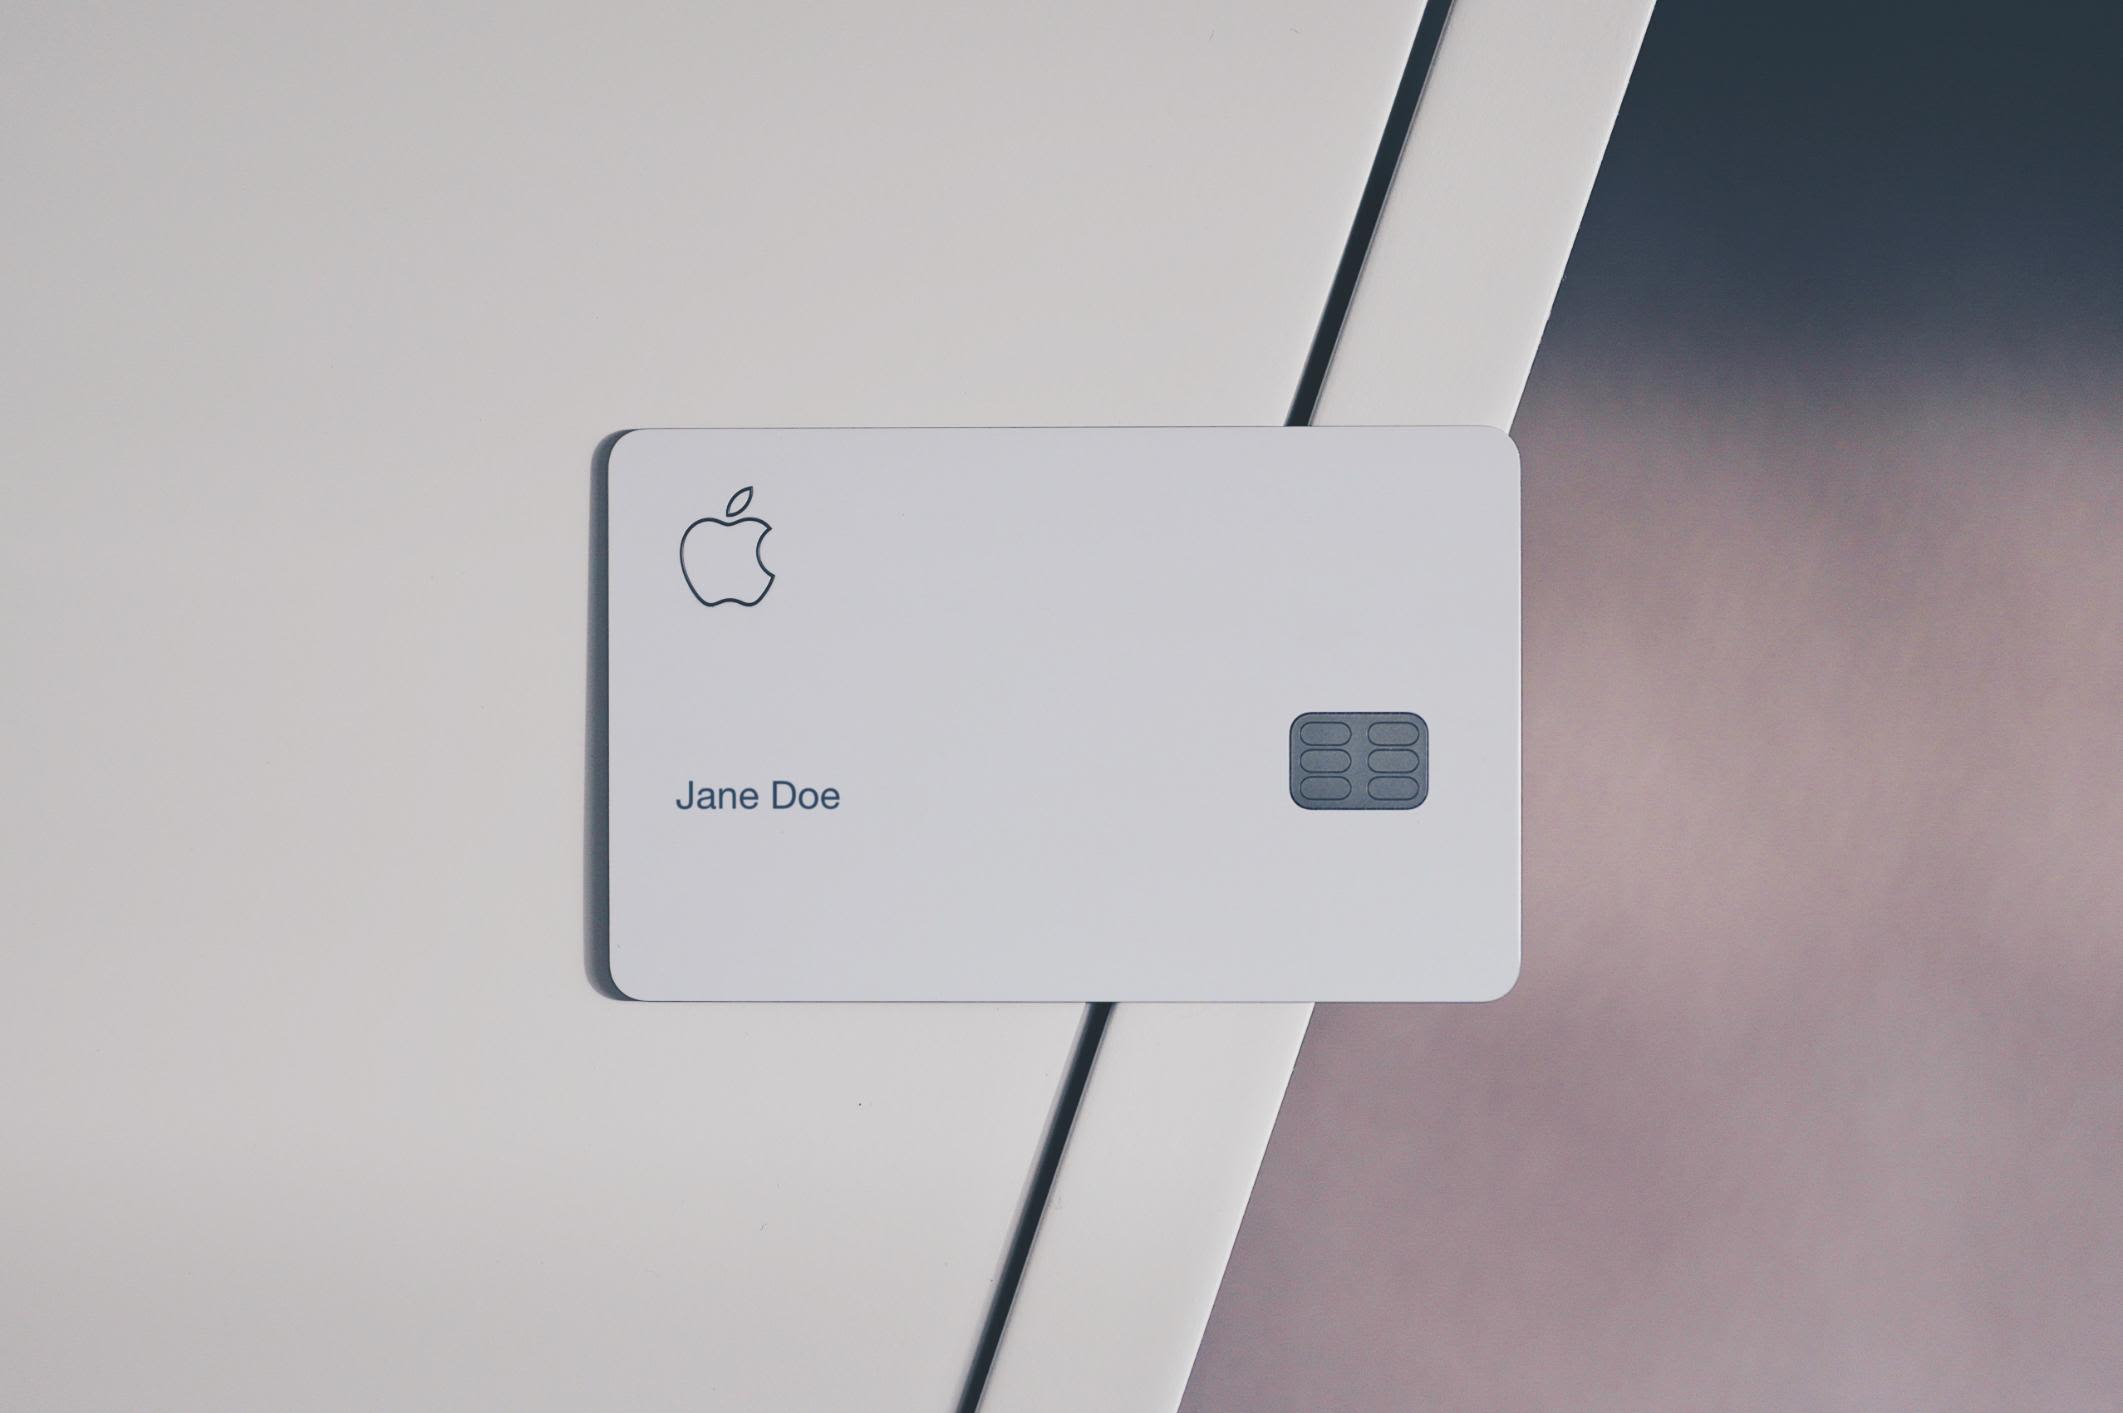 Apple Card is accused of gender bias. Here's how that can happen